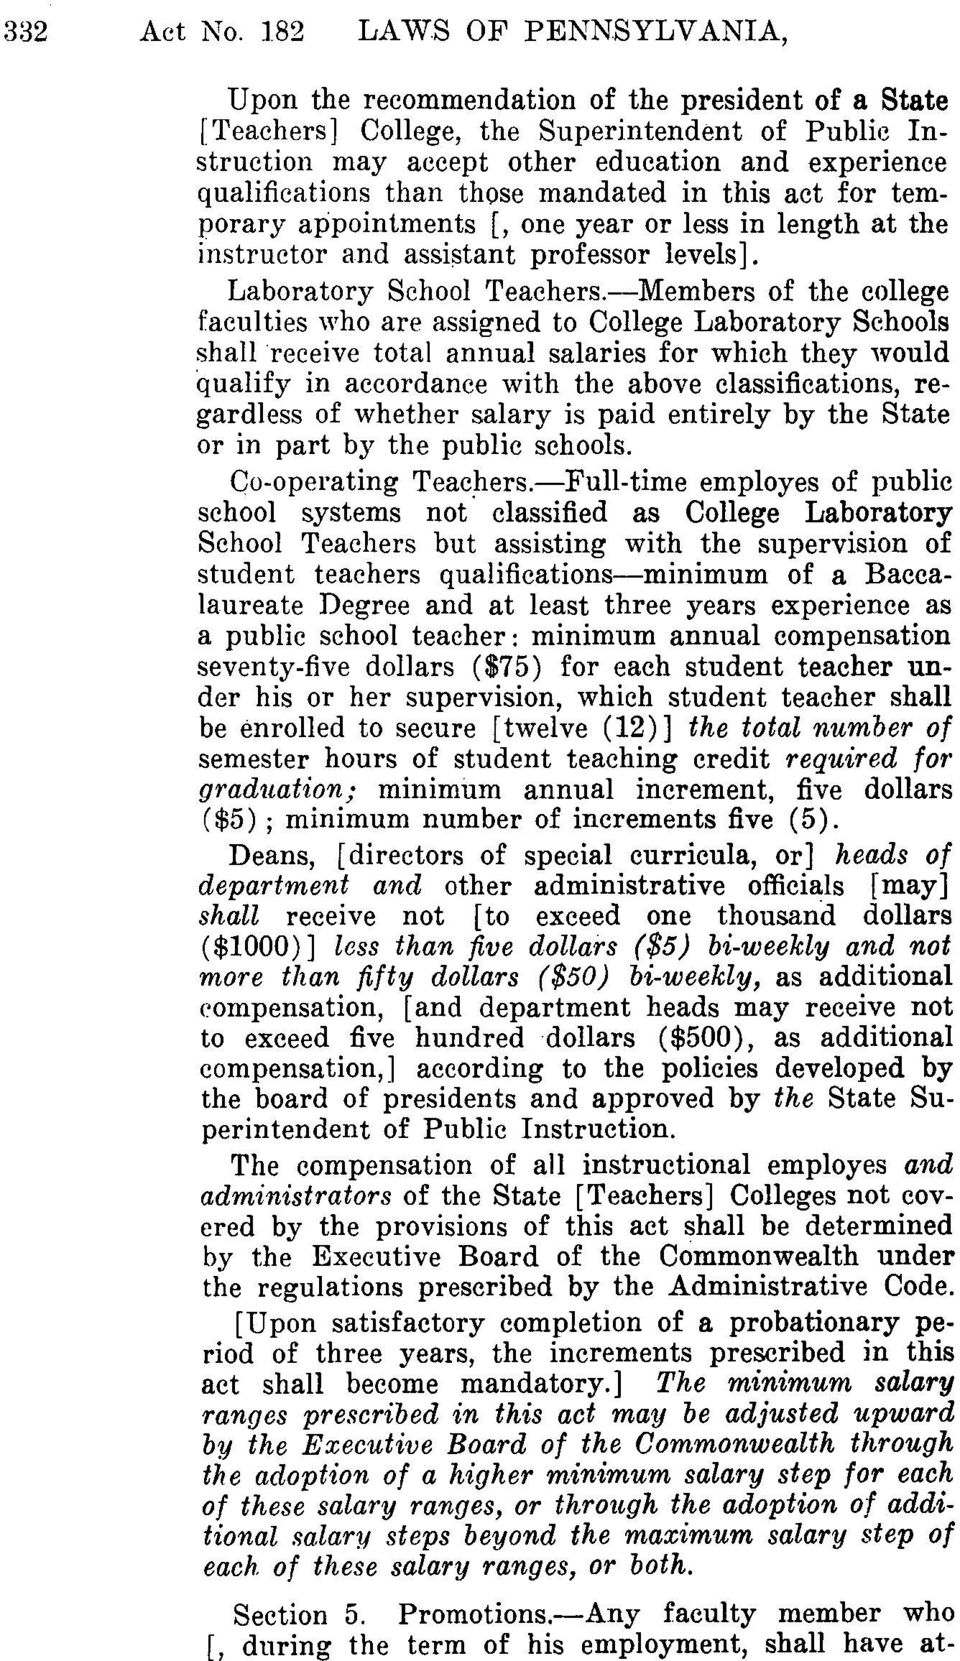 mandated in this act for temporary appointments [, one year or less in length at the instructor and assistant professor levels]. Laboratory School Teachers.